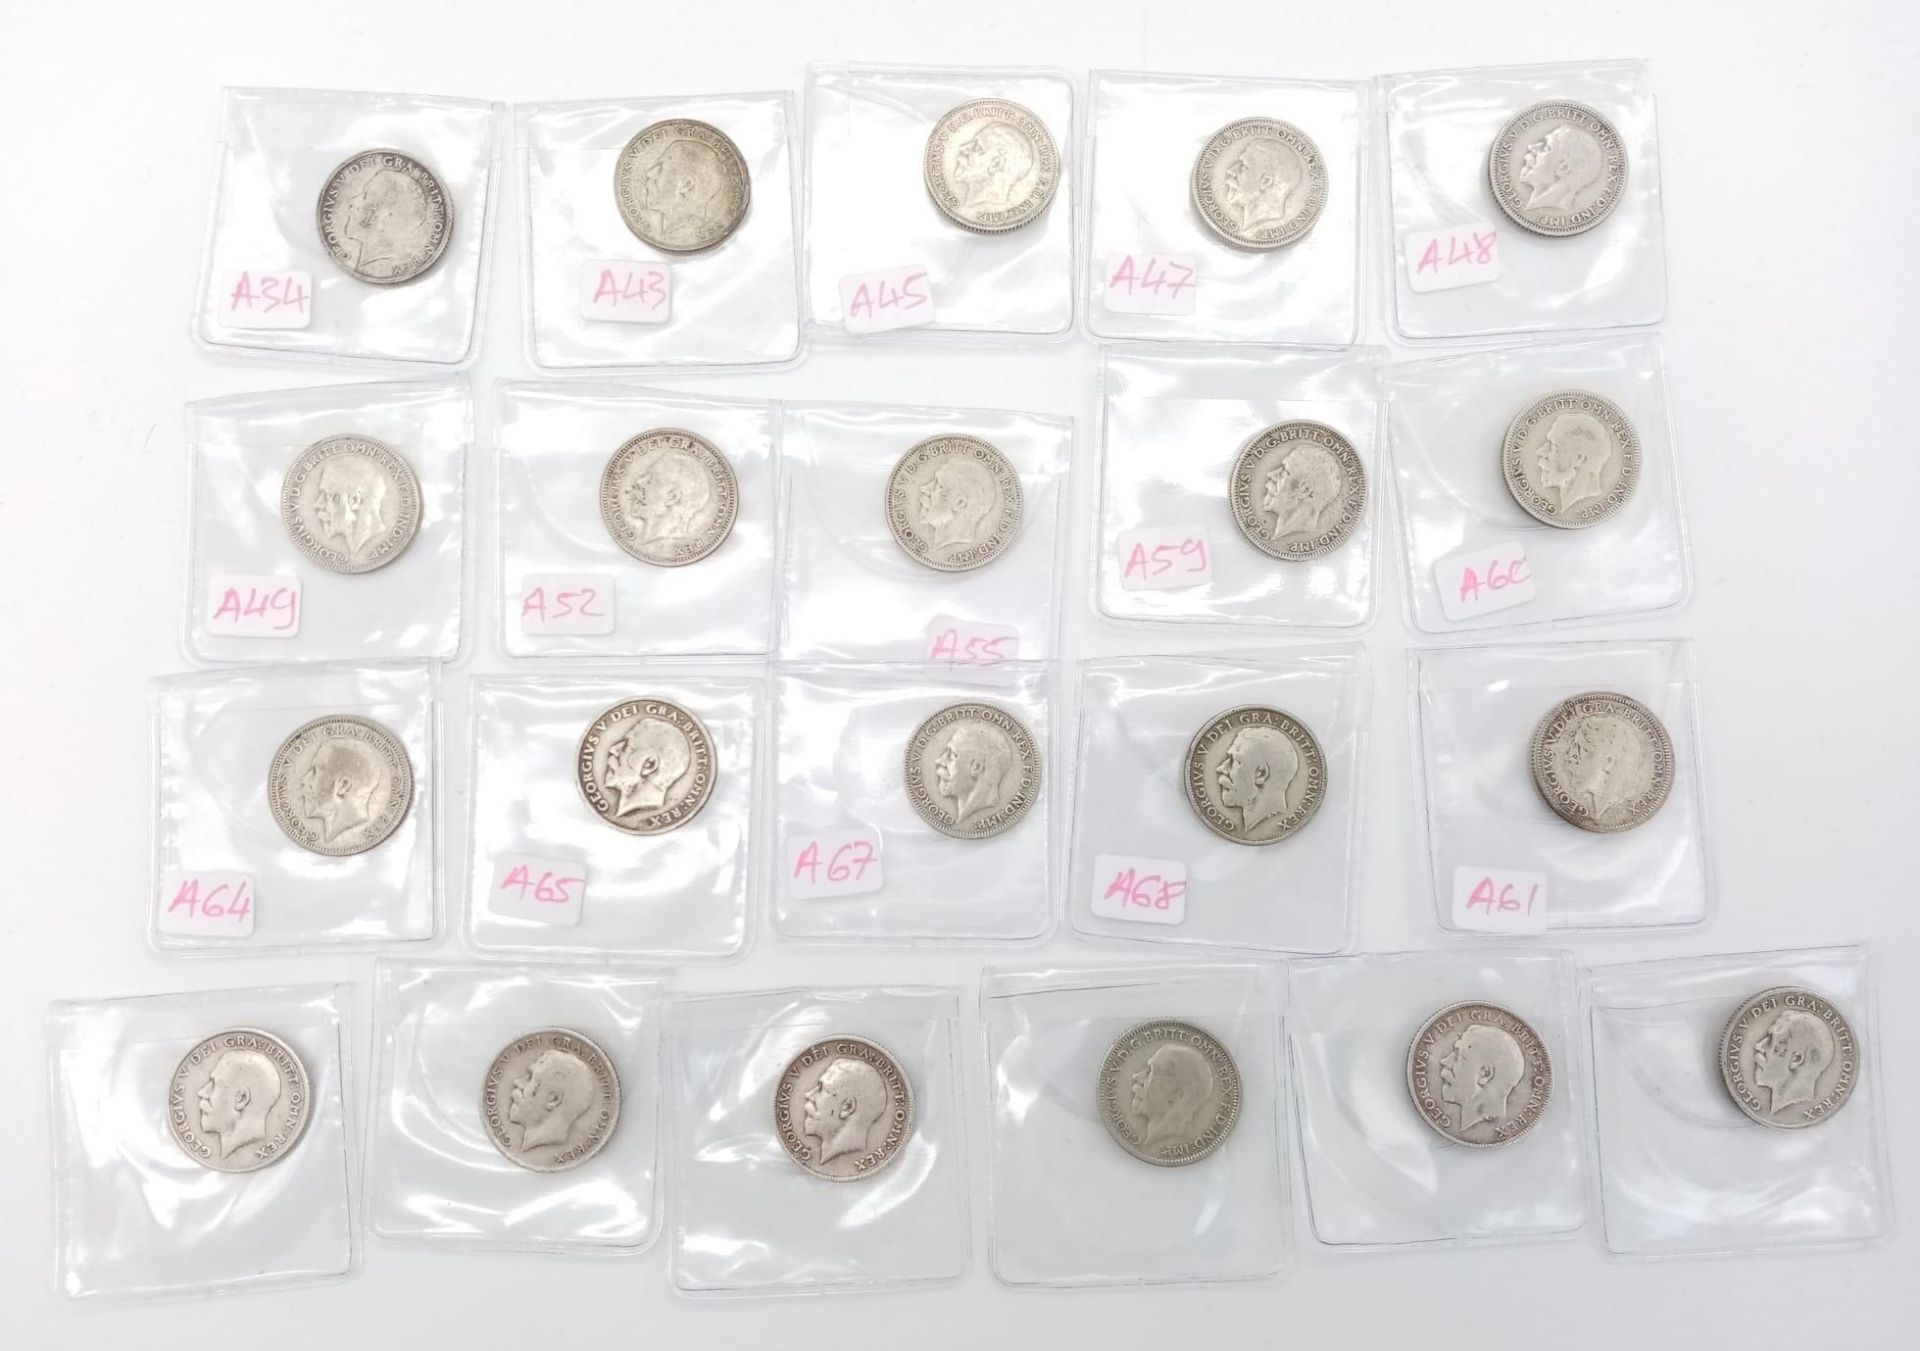 21 George V Pre 1947 Six Pence Silver Coins. 1911- 36 range. Good grades but please see photos. - Image 2 of 2